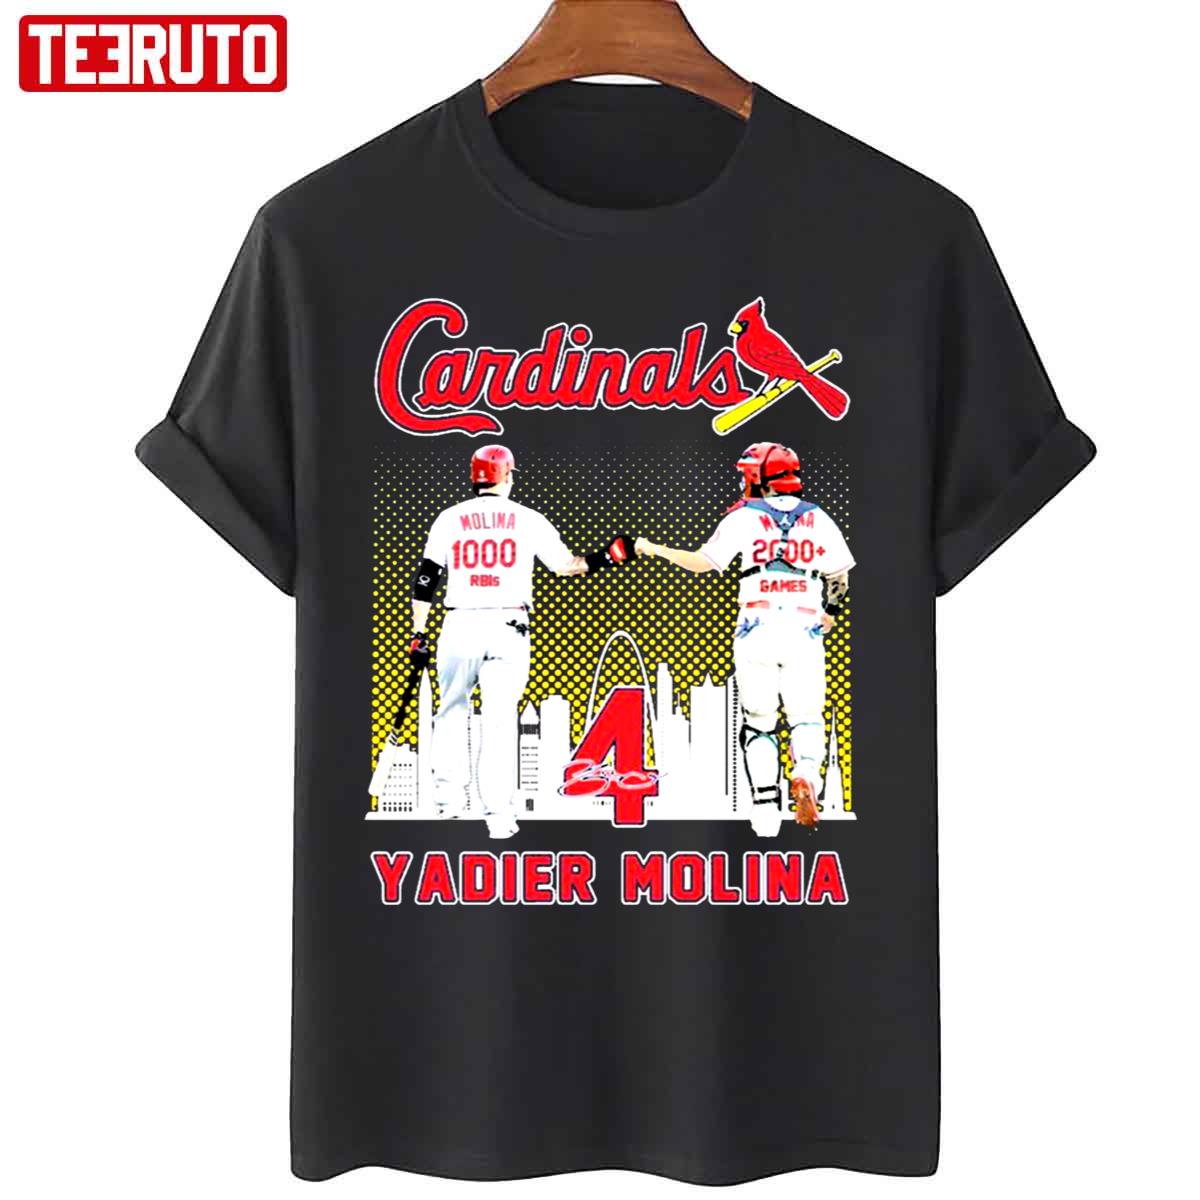 Yadier Molina St Louis Cardinals 1000 Rbis And 2000 Games Signatures Unisex T-Shirt